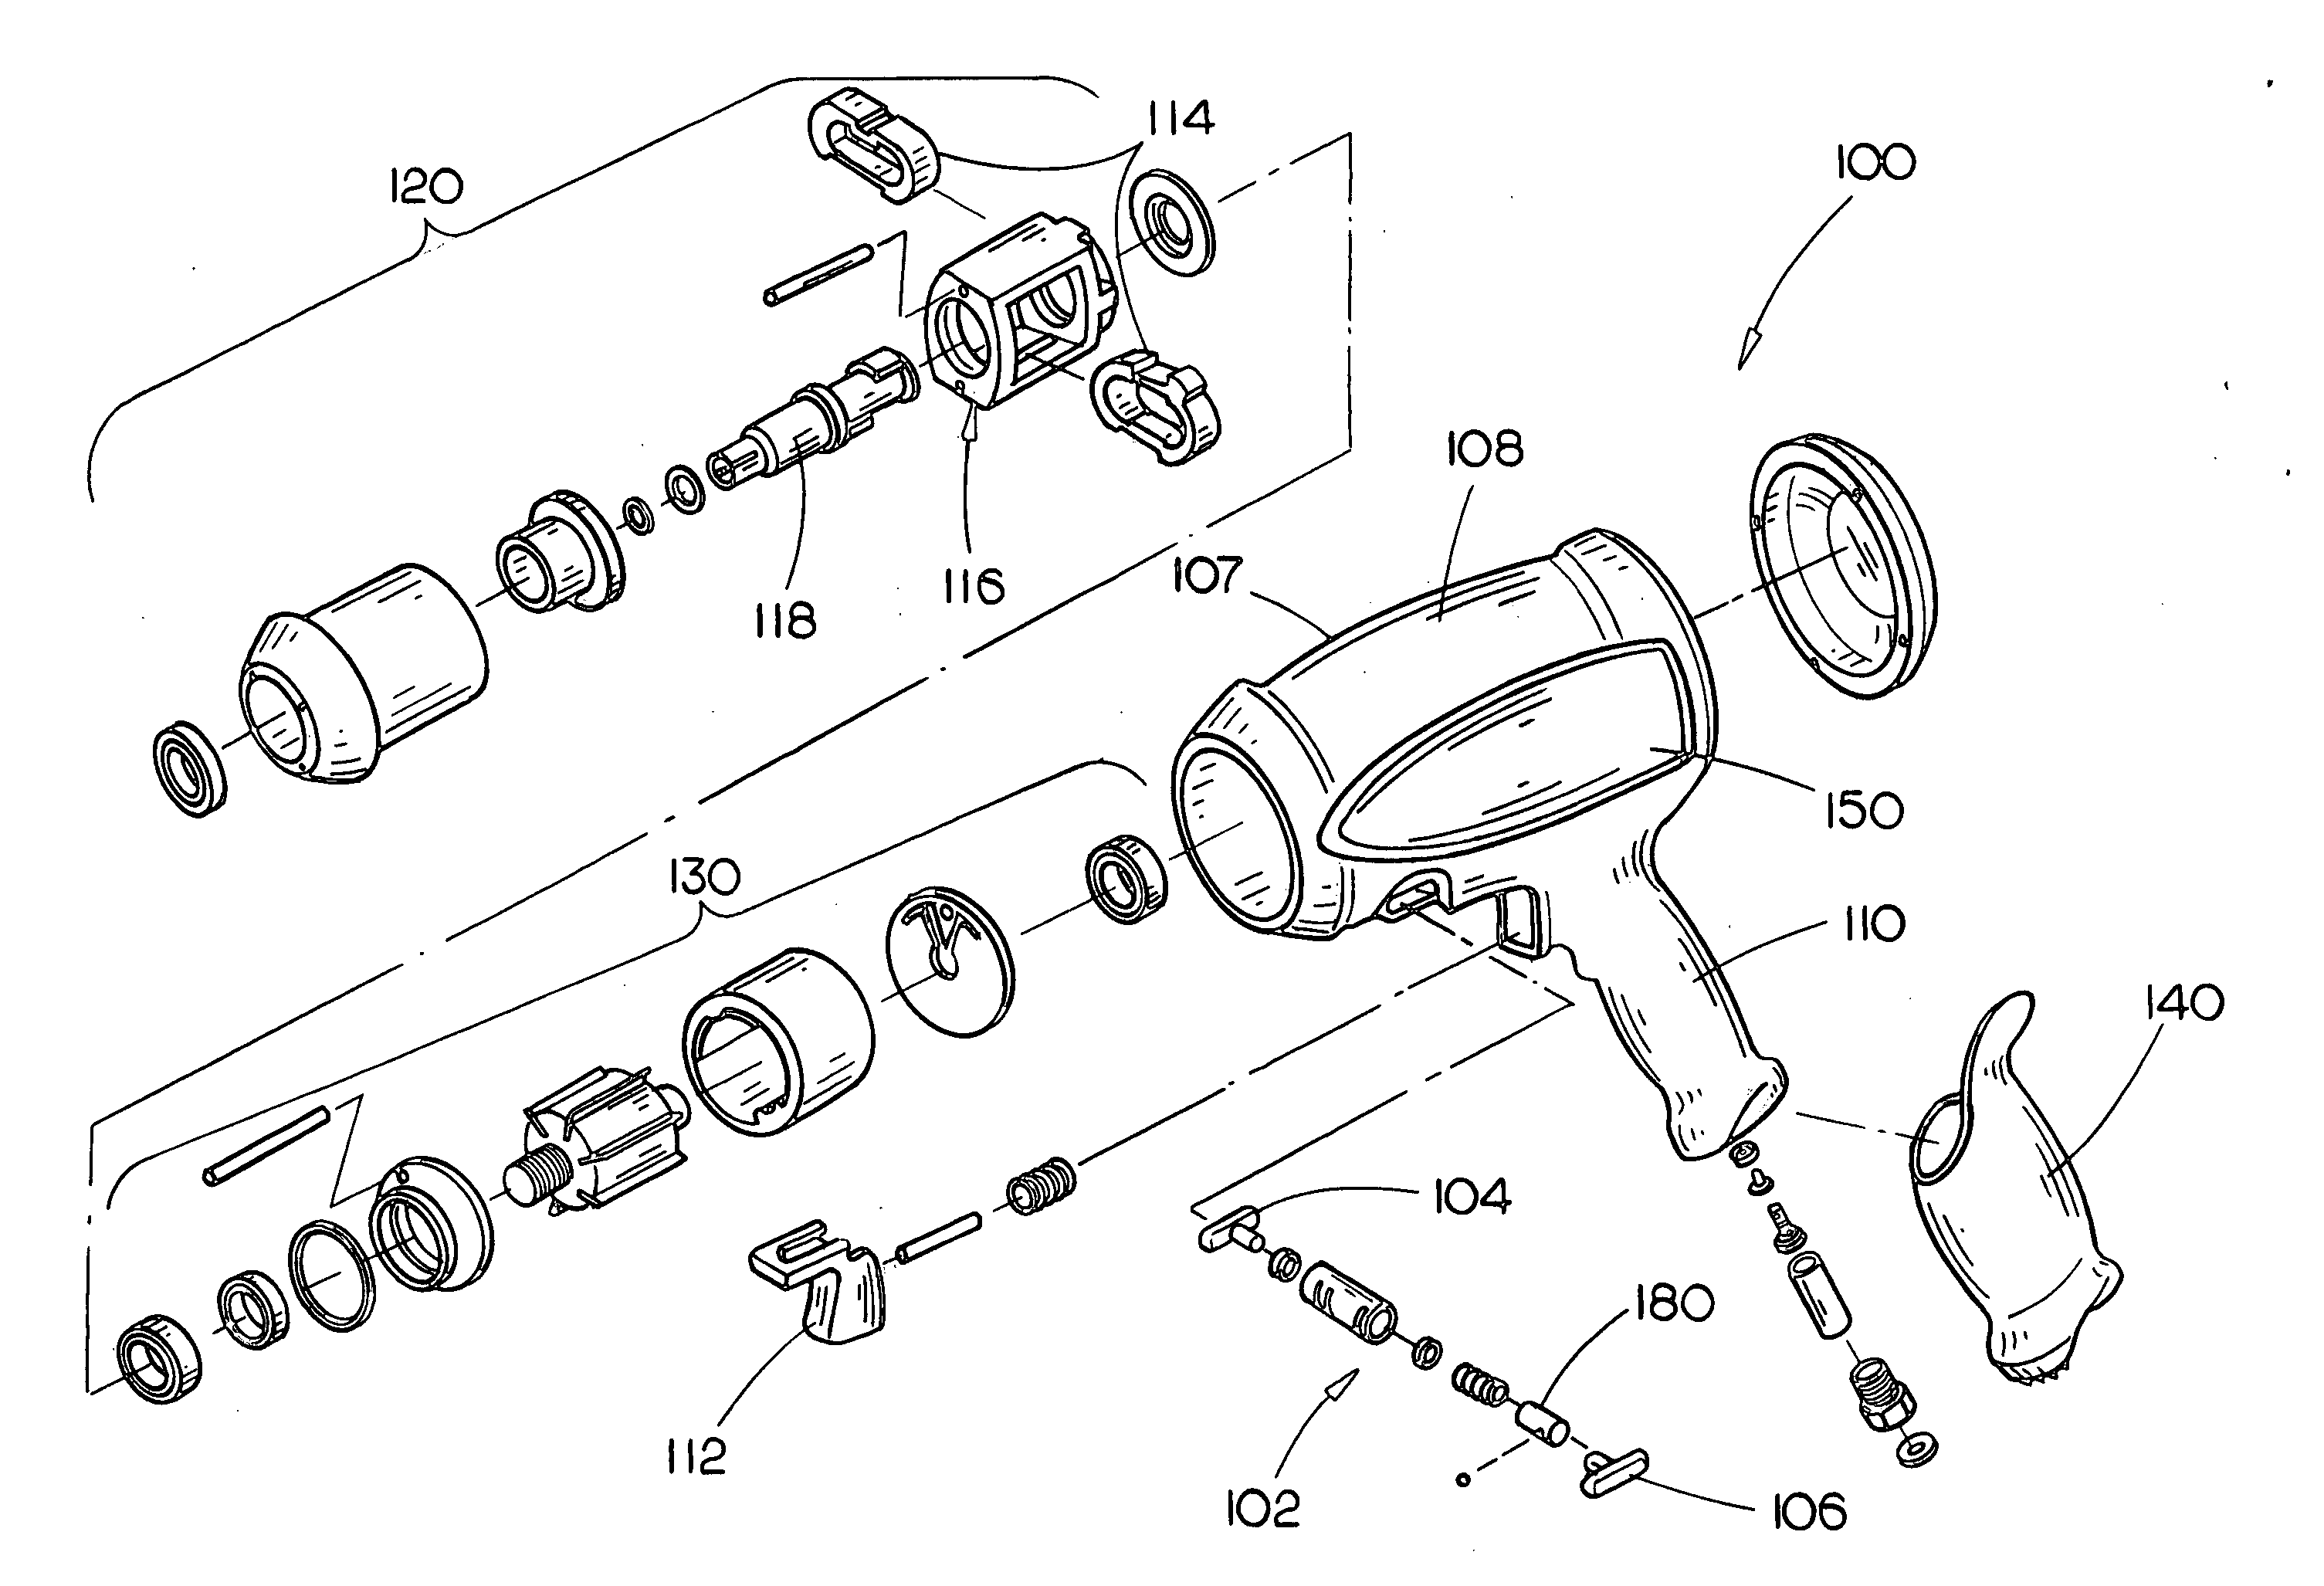 Pneumatically powered rotary tool having linear forward and reverse switch